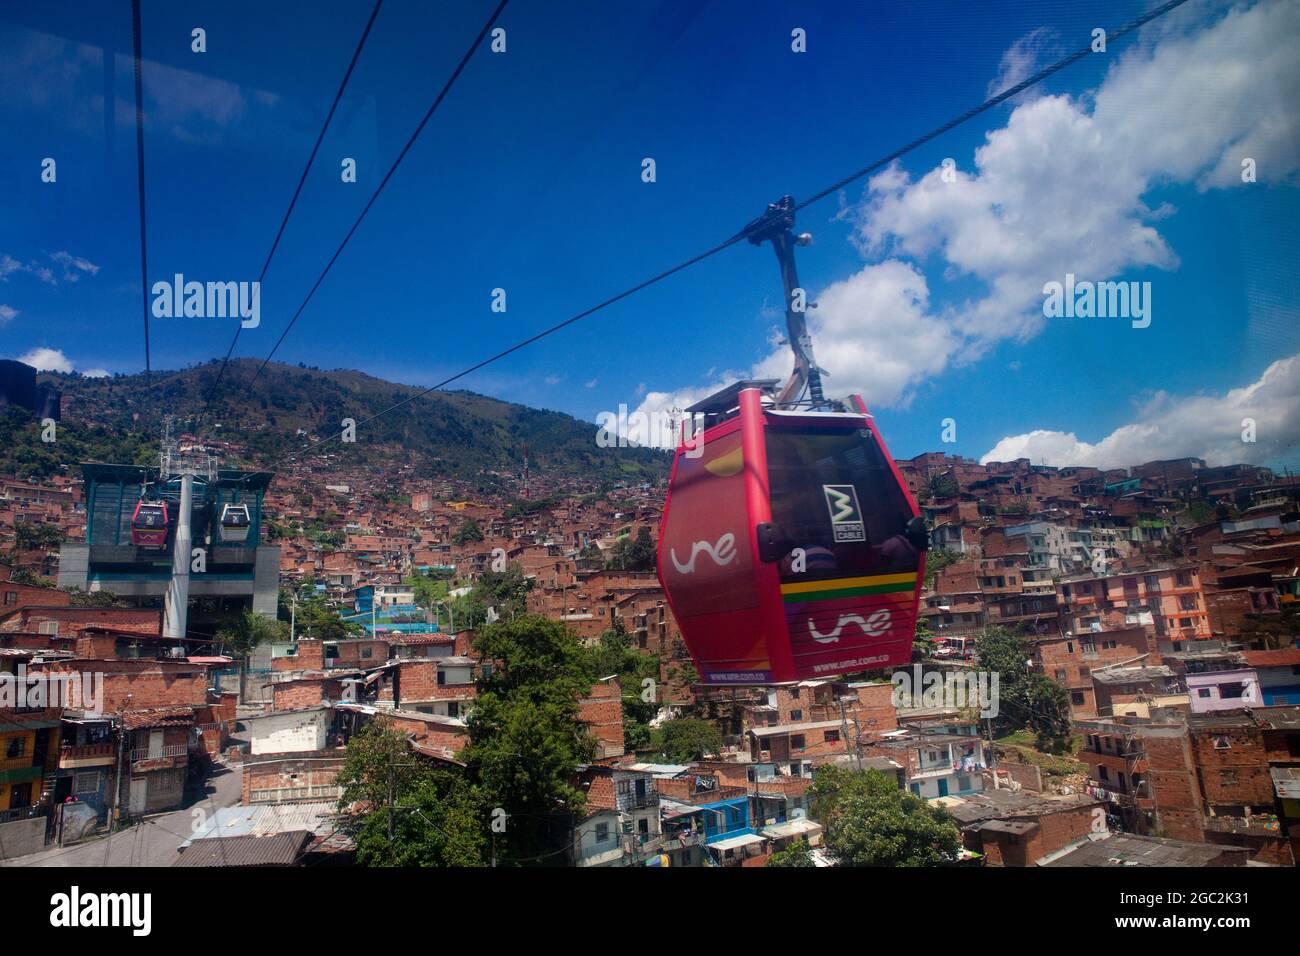 Metrocable gondola lift public transport system in Medellin, Colombia Stock Photo